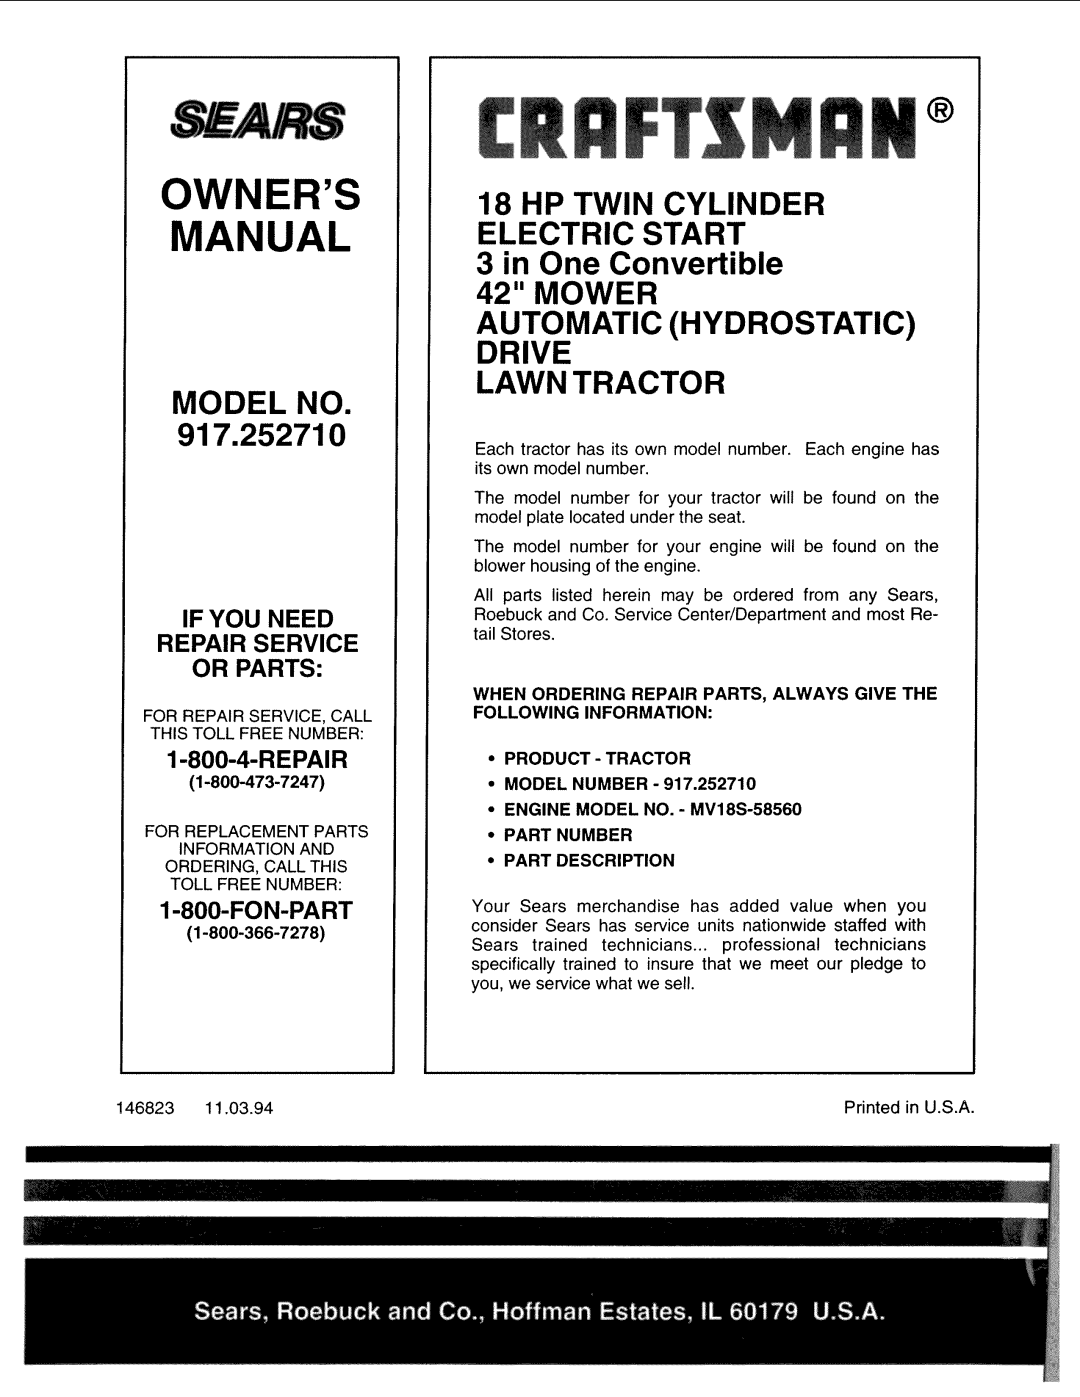 Sears 917.25271 Owners Manual, Model No, Hp Twin Cylinder Electric Start, in One Convertible 42 MOWER, Repair, Fon-Part 